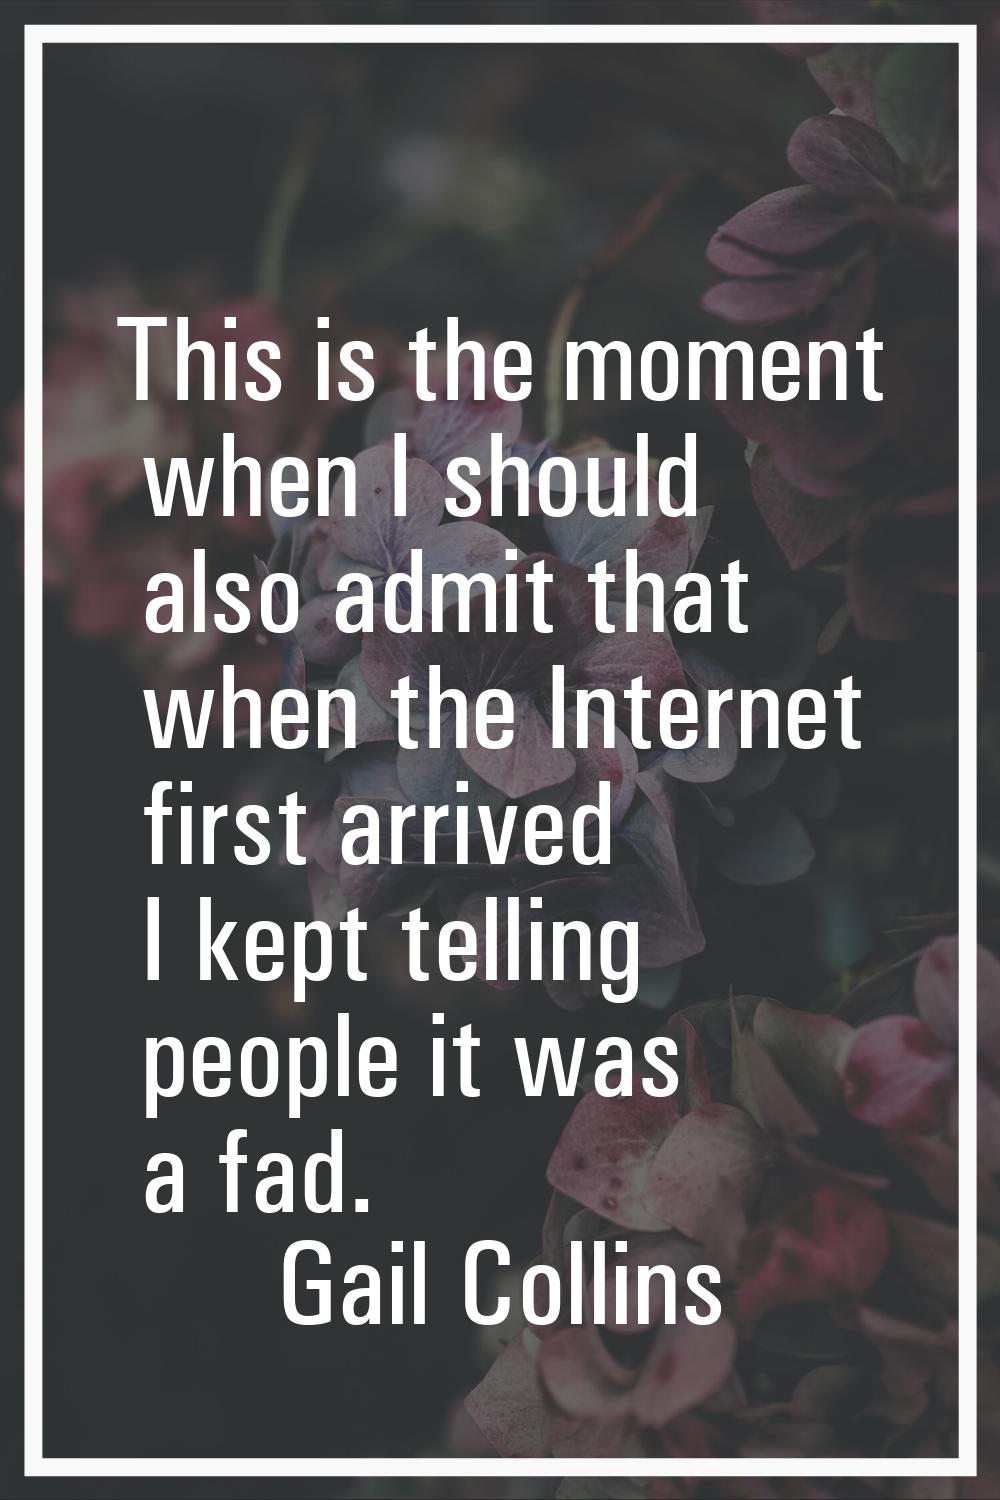 This is the moment when I should also admit that when the Internet first arrived I kept telling peo